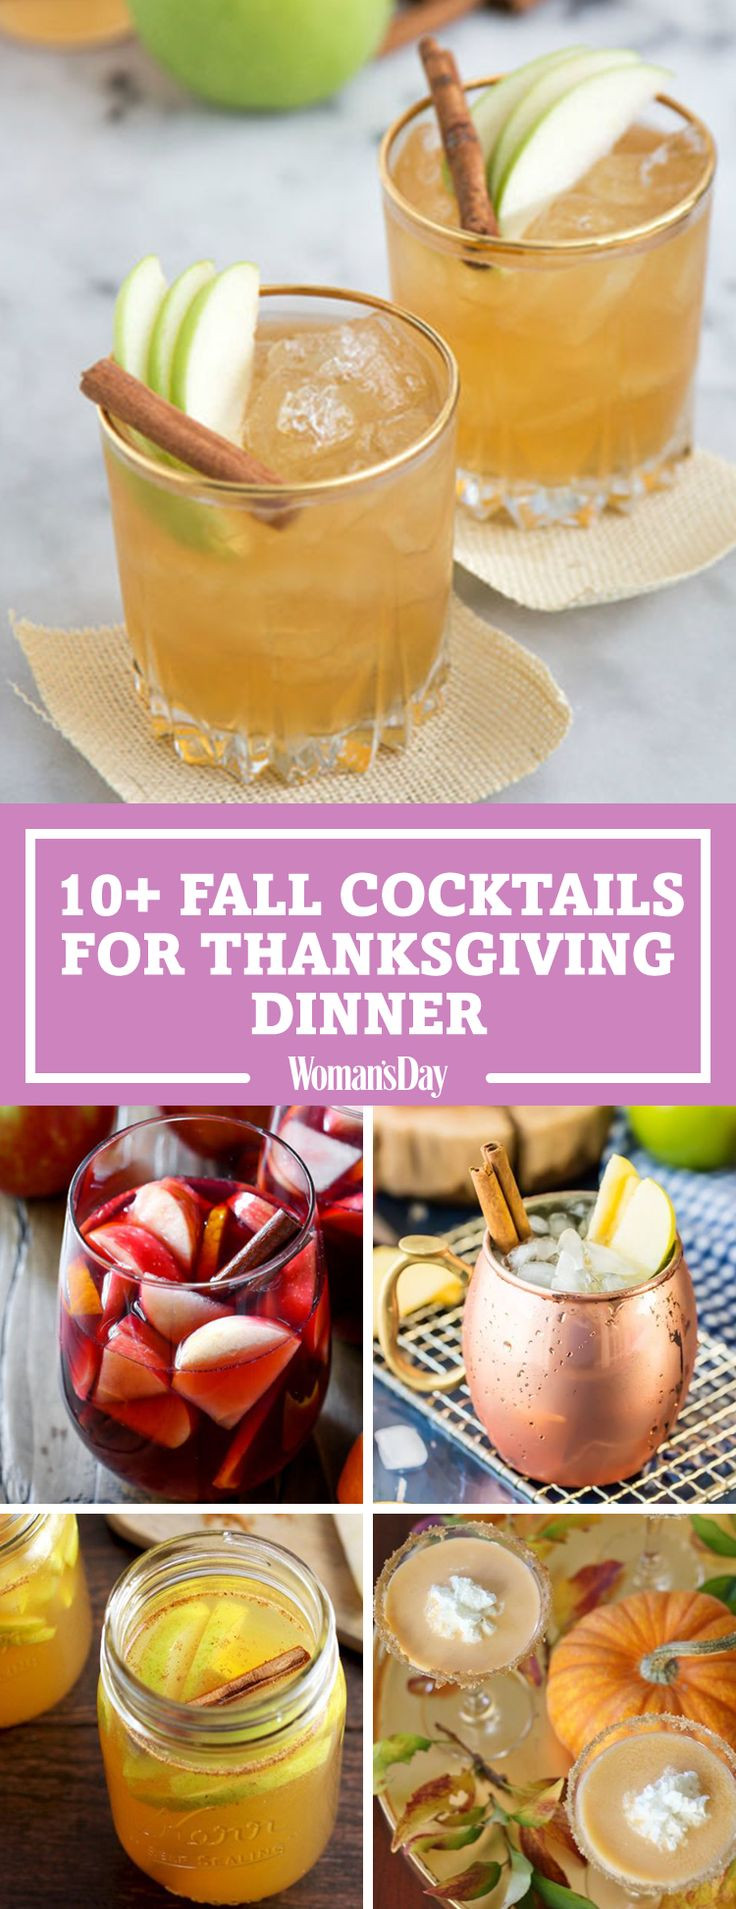 Alcoholic Thanksgiving Drinks
 Best 25 Mixed drink recipes ideas on Pinterest